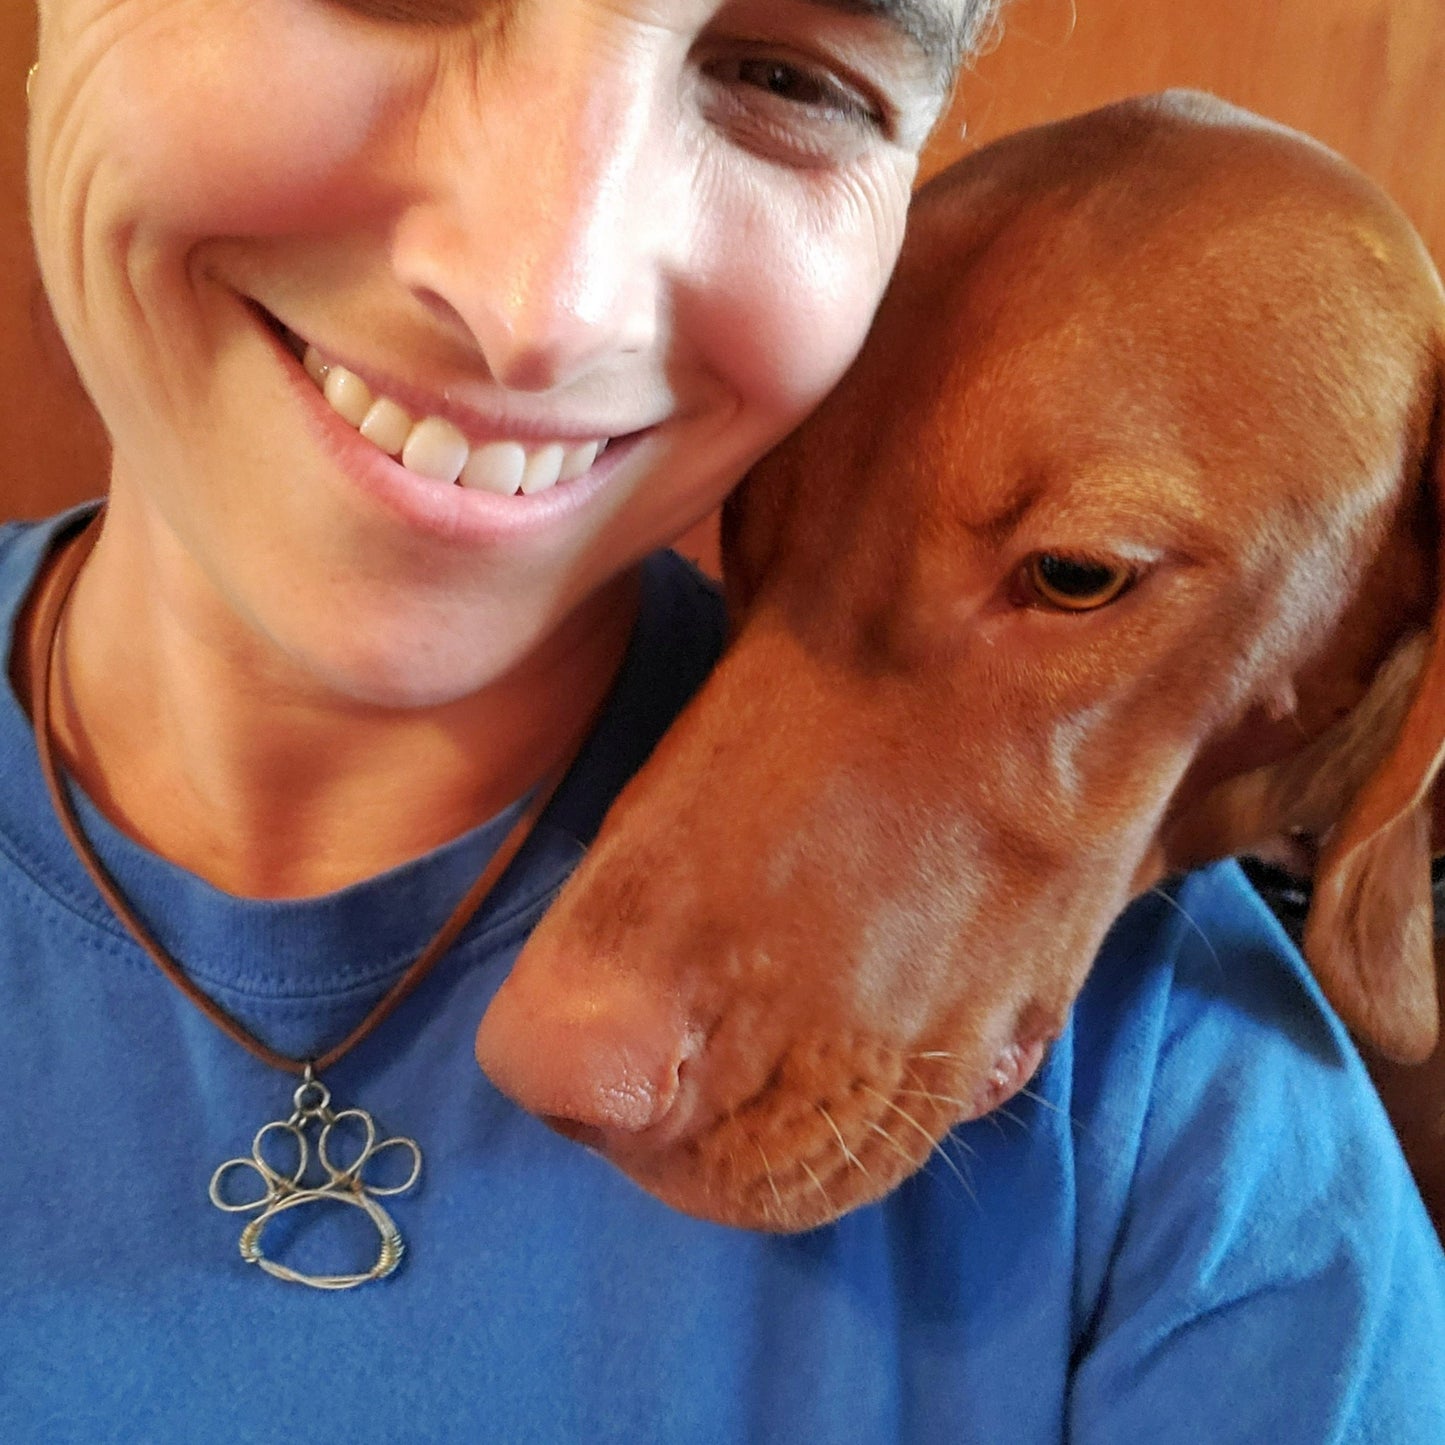 bottom of a woman's face wearing blue t-shirt and a necklace - necklace has a paw print pendant made from an upcycled guitar string - head of a vizsla